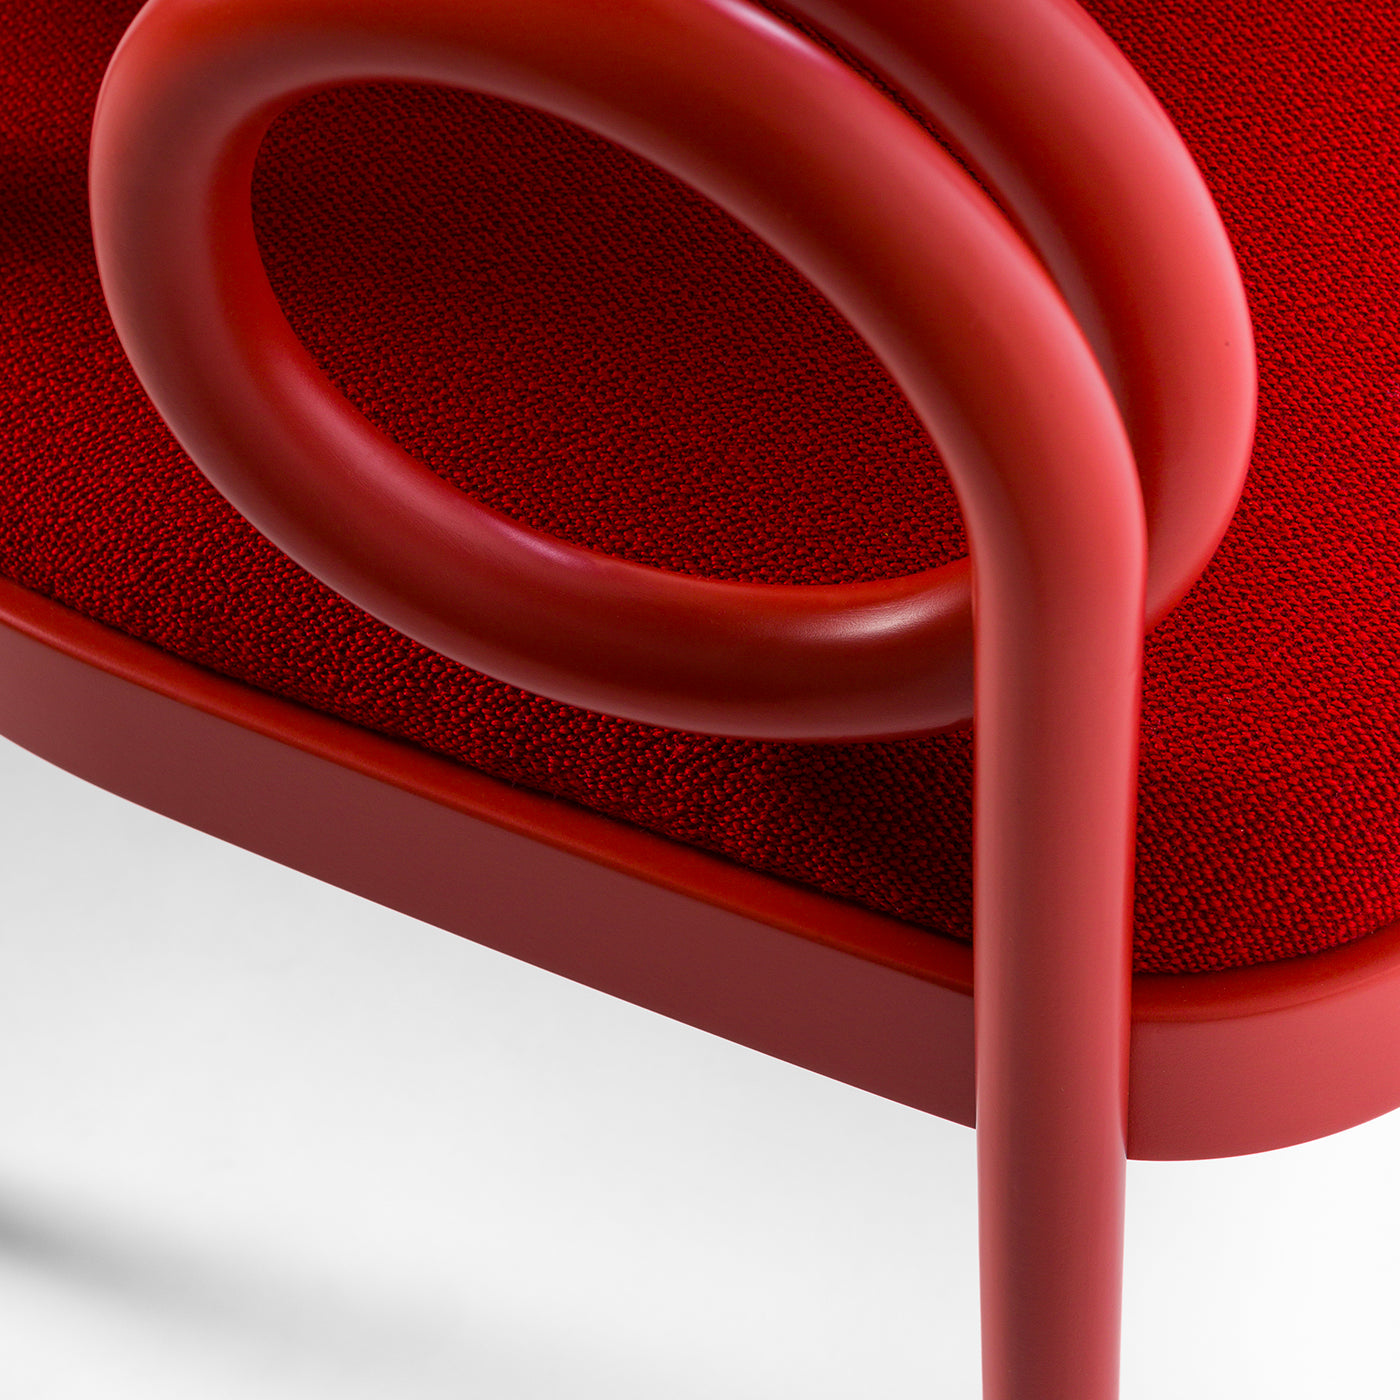 Loop Red Lounge Chair by India Mahdavi - Alternative view 4